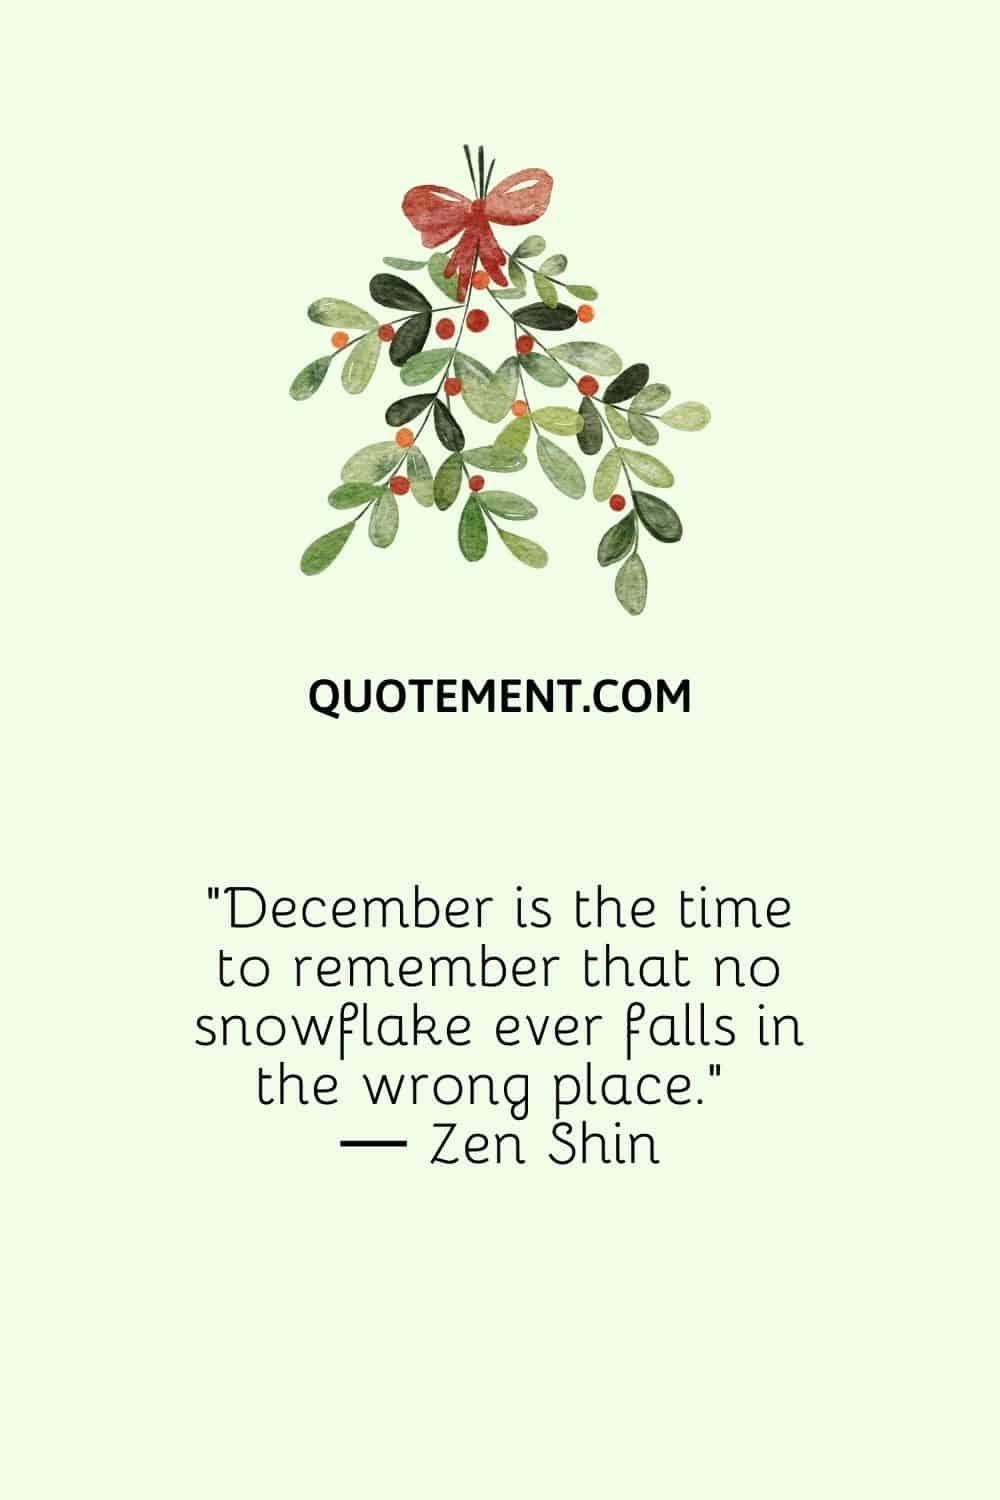 “December is the time to remember that no snowflake ever falls in the wrong place.” ― Zen Shin